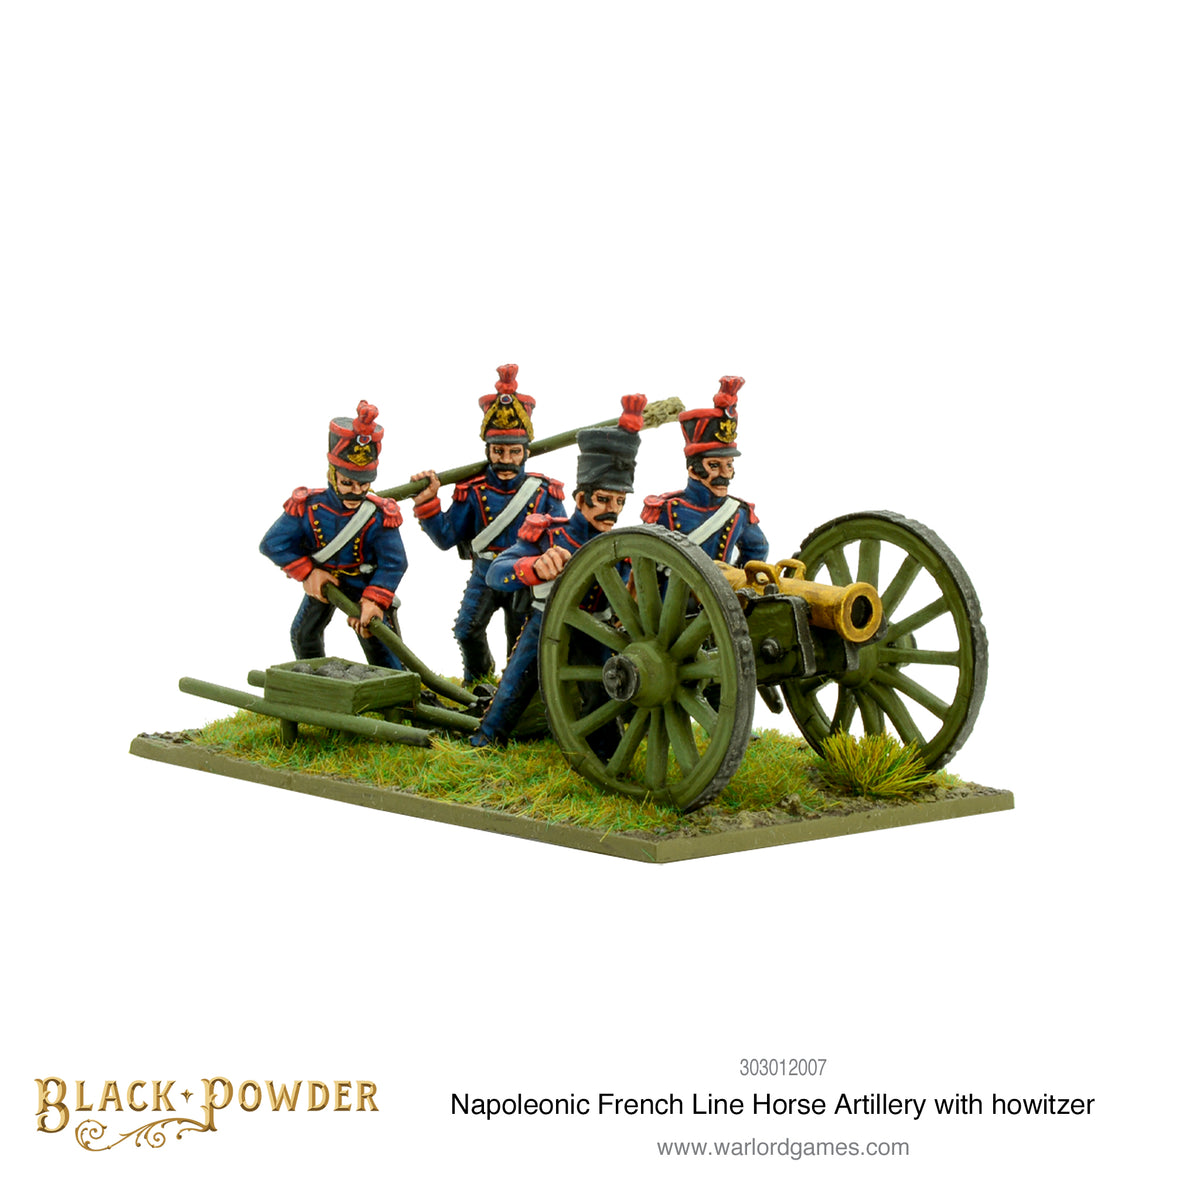 Napoleonic French Line Horse Artillery with howitzer